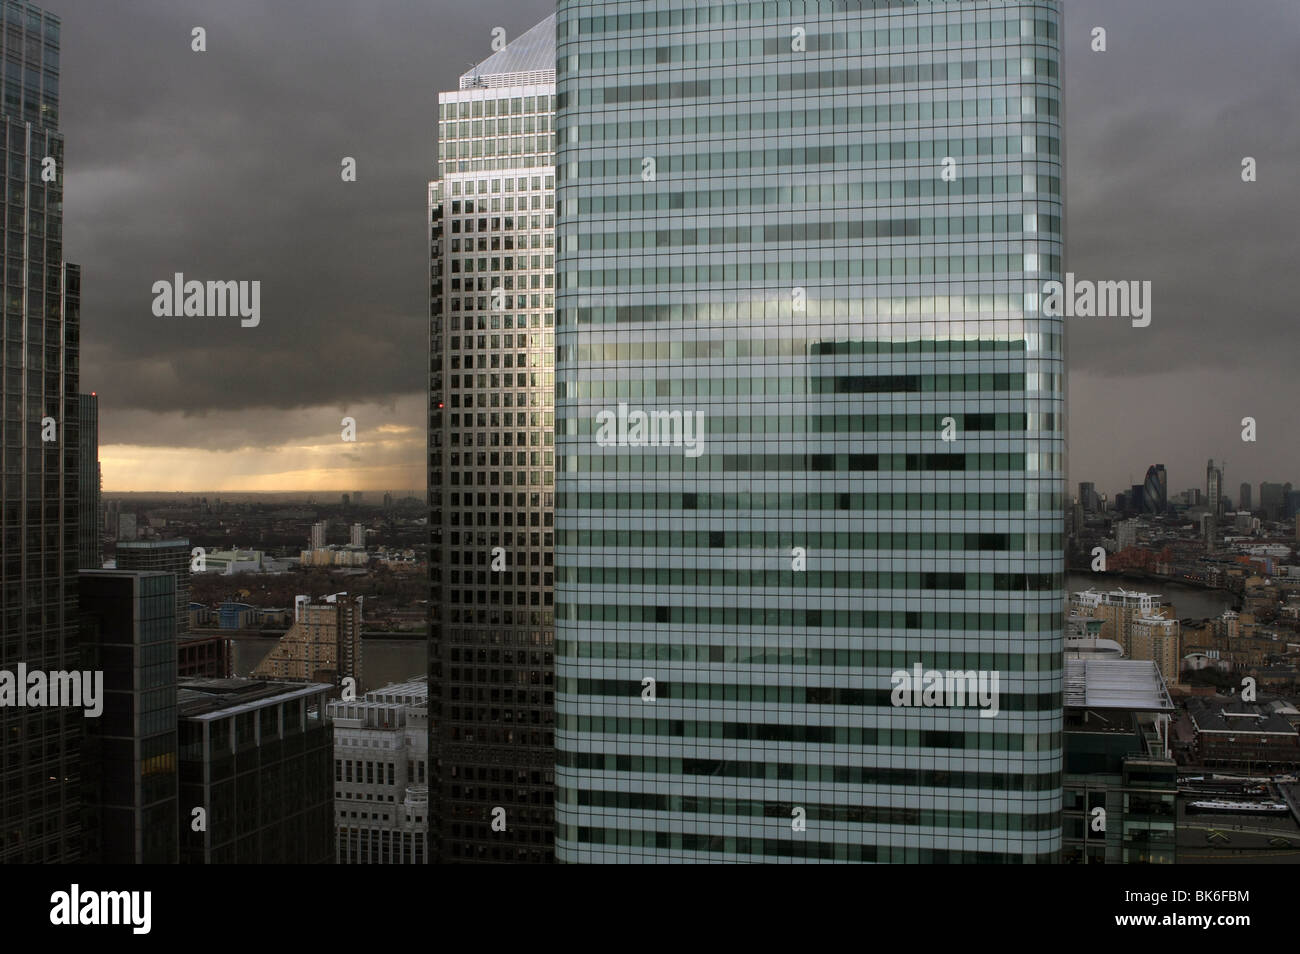 a view across London, on an overcast day, from 27th floor of Barclays Bank, Canary Wharf. HSBC HQ in foreground Stock Photo